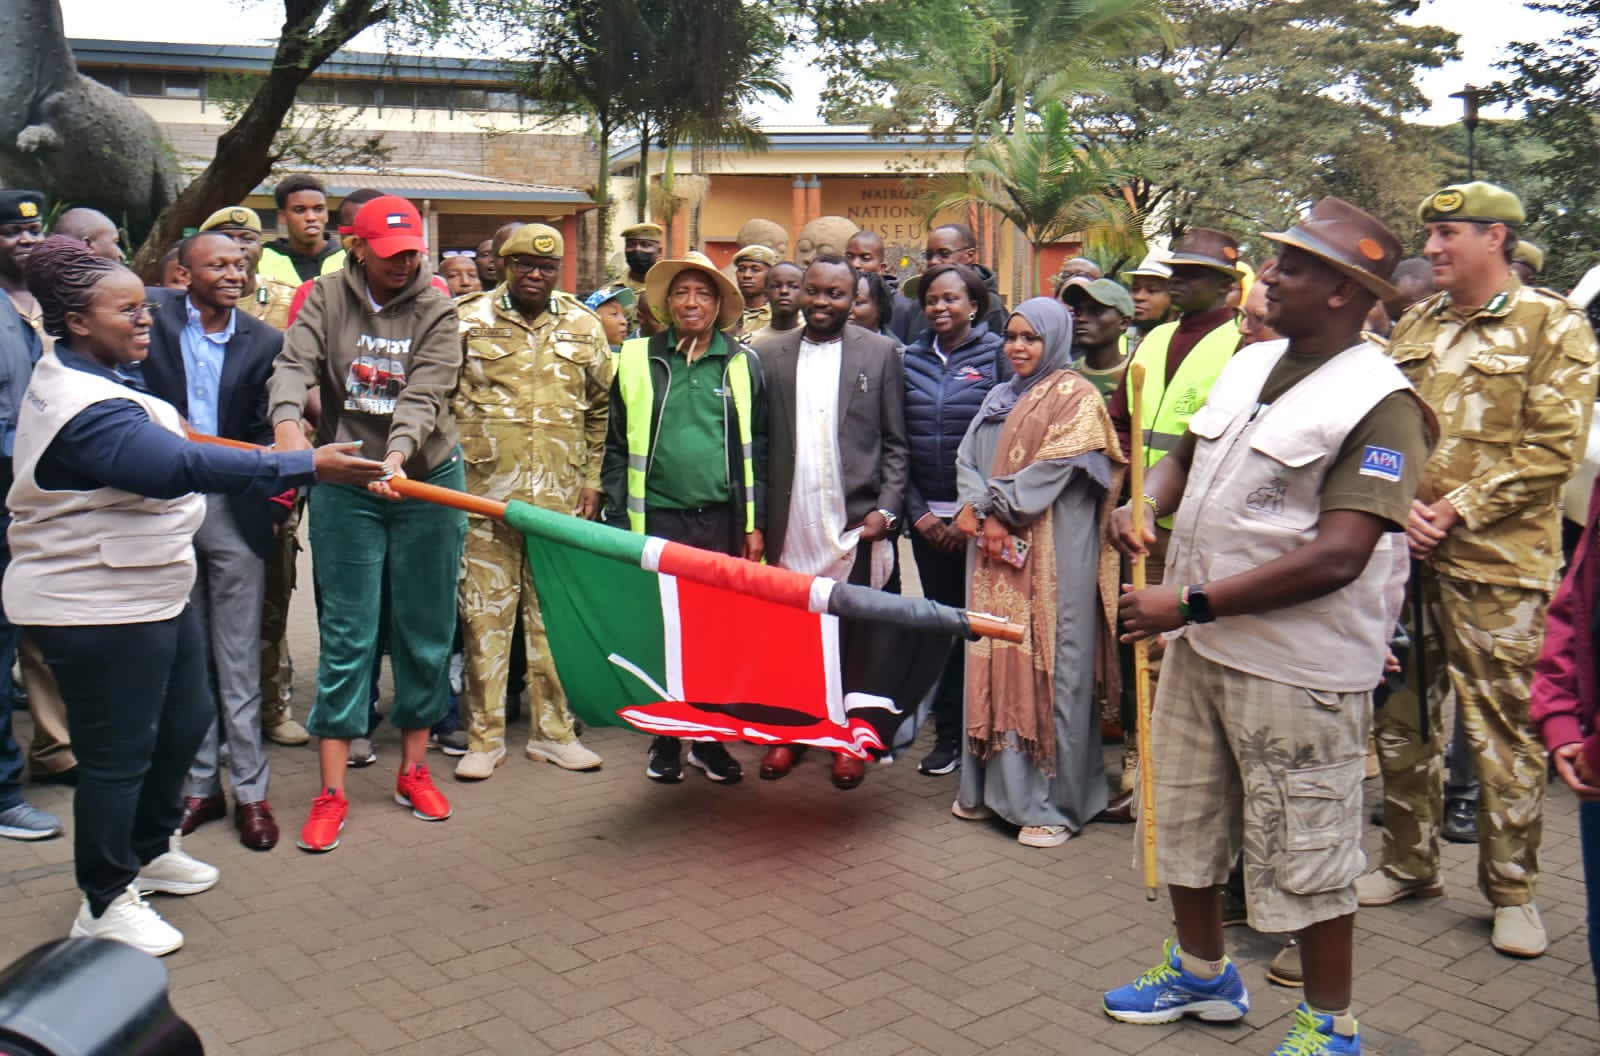 The Cabinet Secretary, Hon. Peninah Malonza, is joined by the Deputy Governor for Murang'a County, H.E Stephen Munania, and Senator Karen Nyamu in flagging off of the East and Central Africa campaign walk, at the National Museums of Kenya.